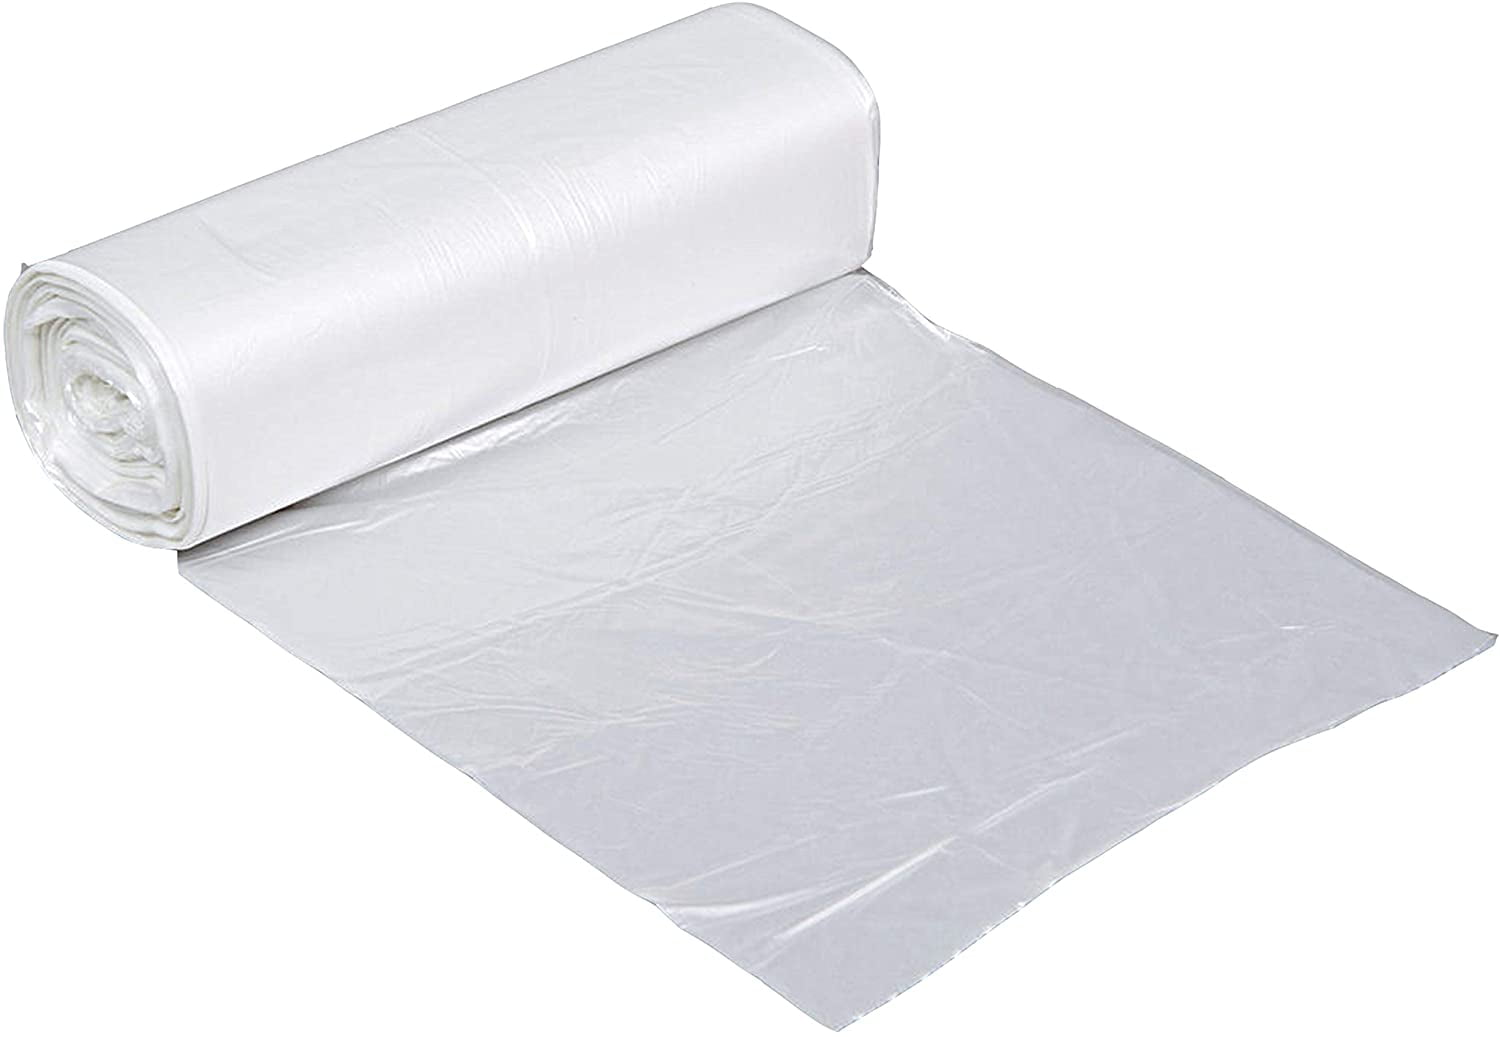 Often Used Not Leak Plastic Bag Trash Pouchs Clean Environment Garbage Bags  x100